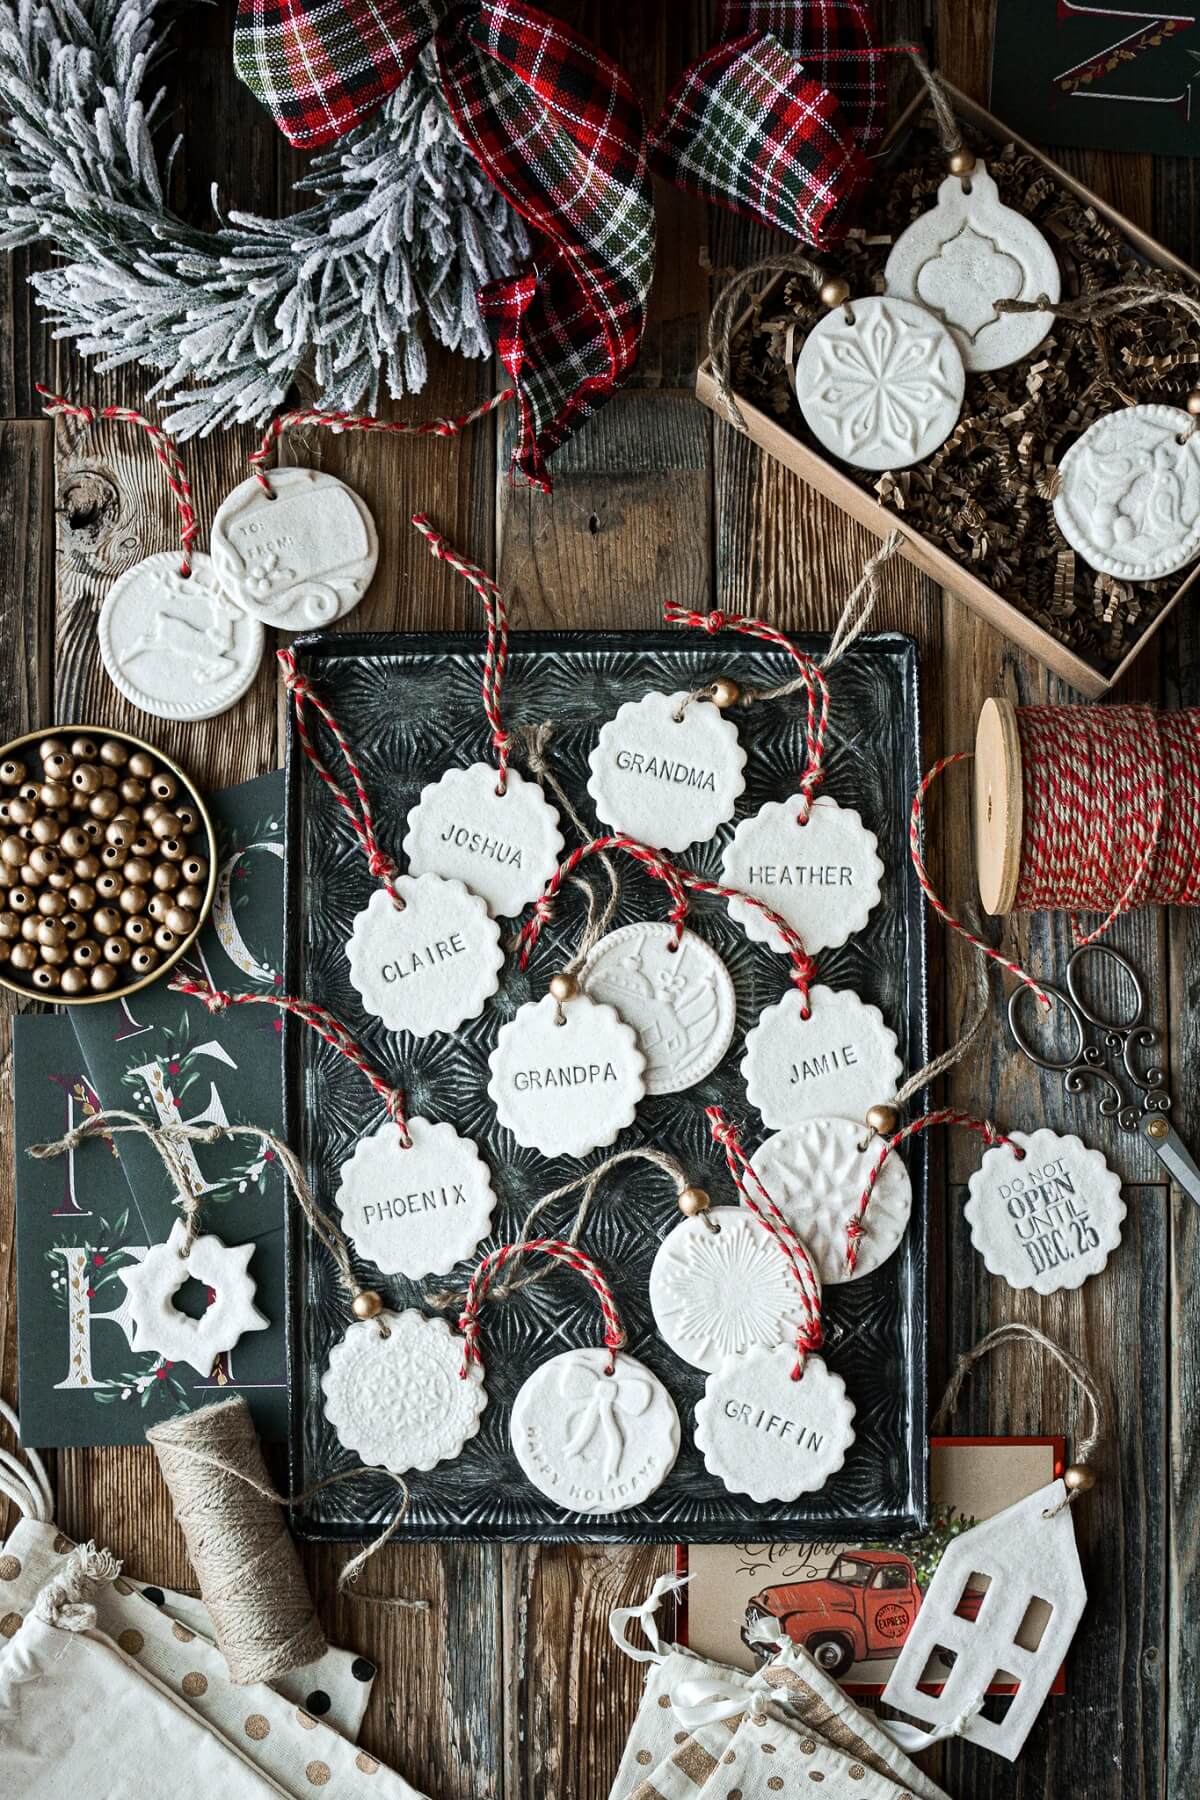 Salt dough Christmas ornaments surrounded by twine, beads and a wreath.